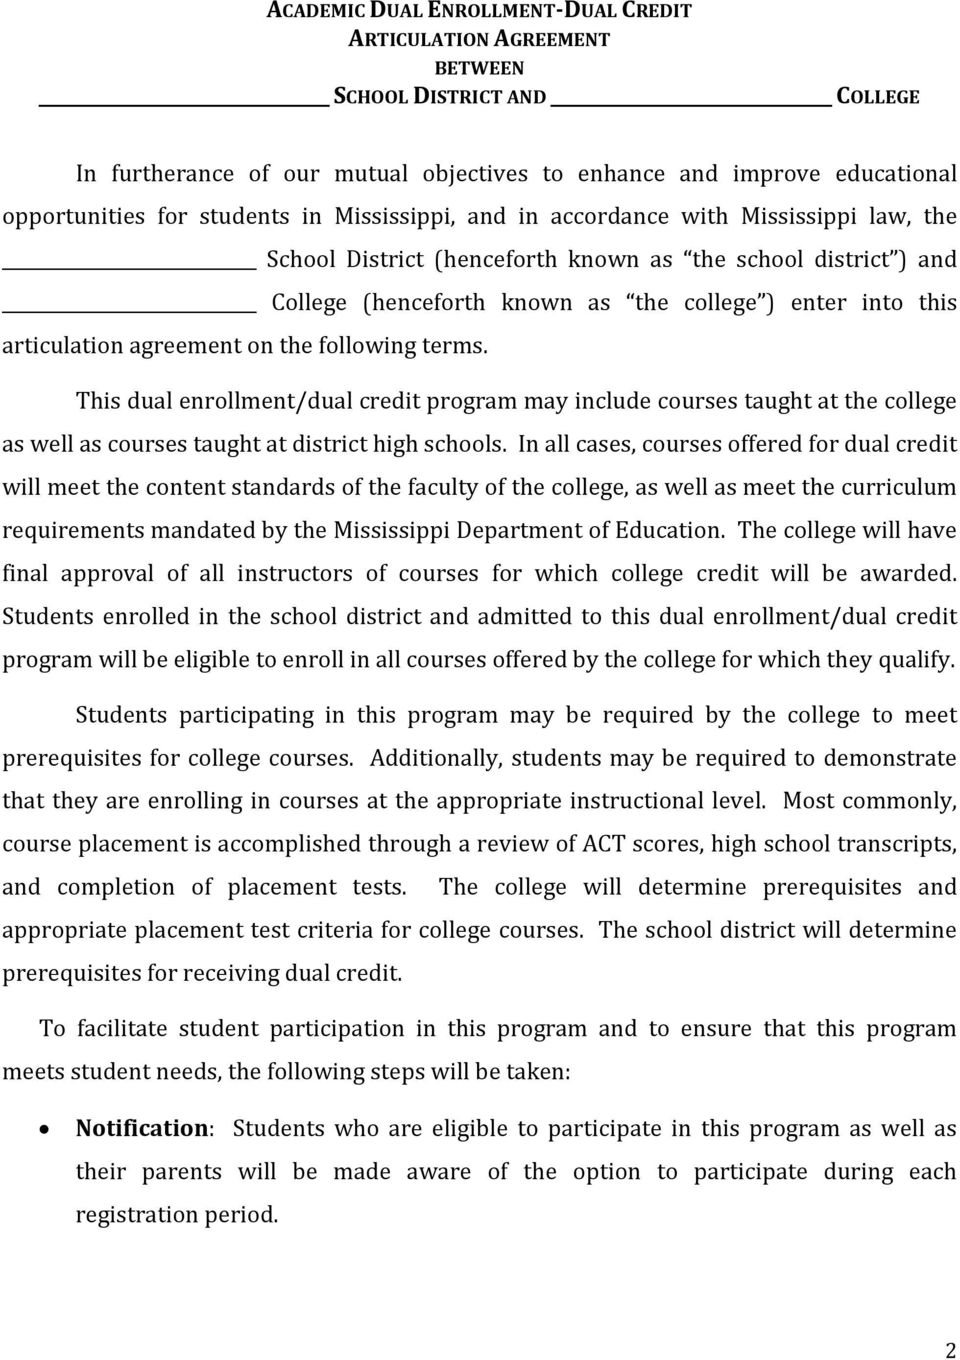 agreement on the following terms. This dual enrollment/dual credit program may include courses taught at the college as well as courses taught at district high schools.